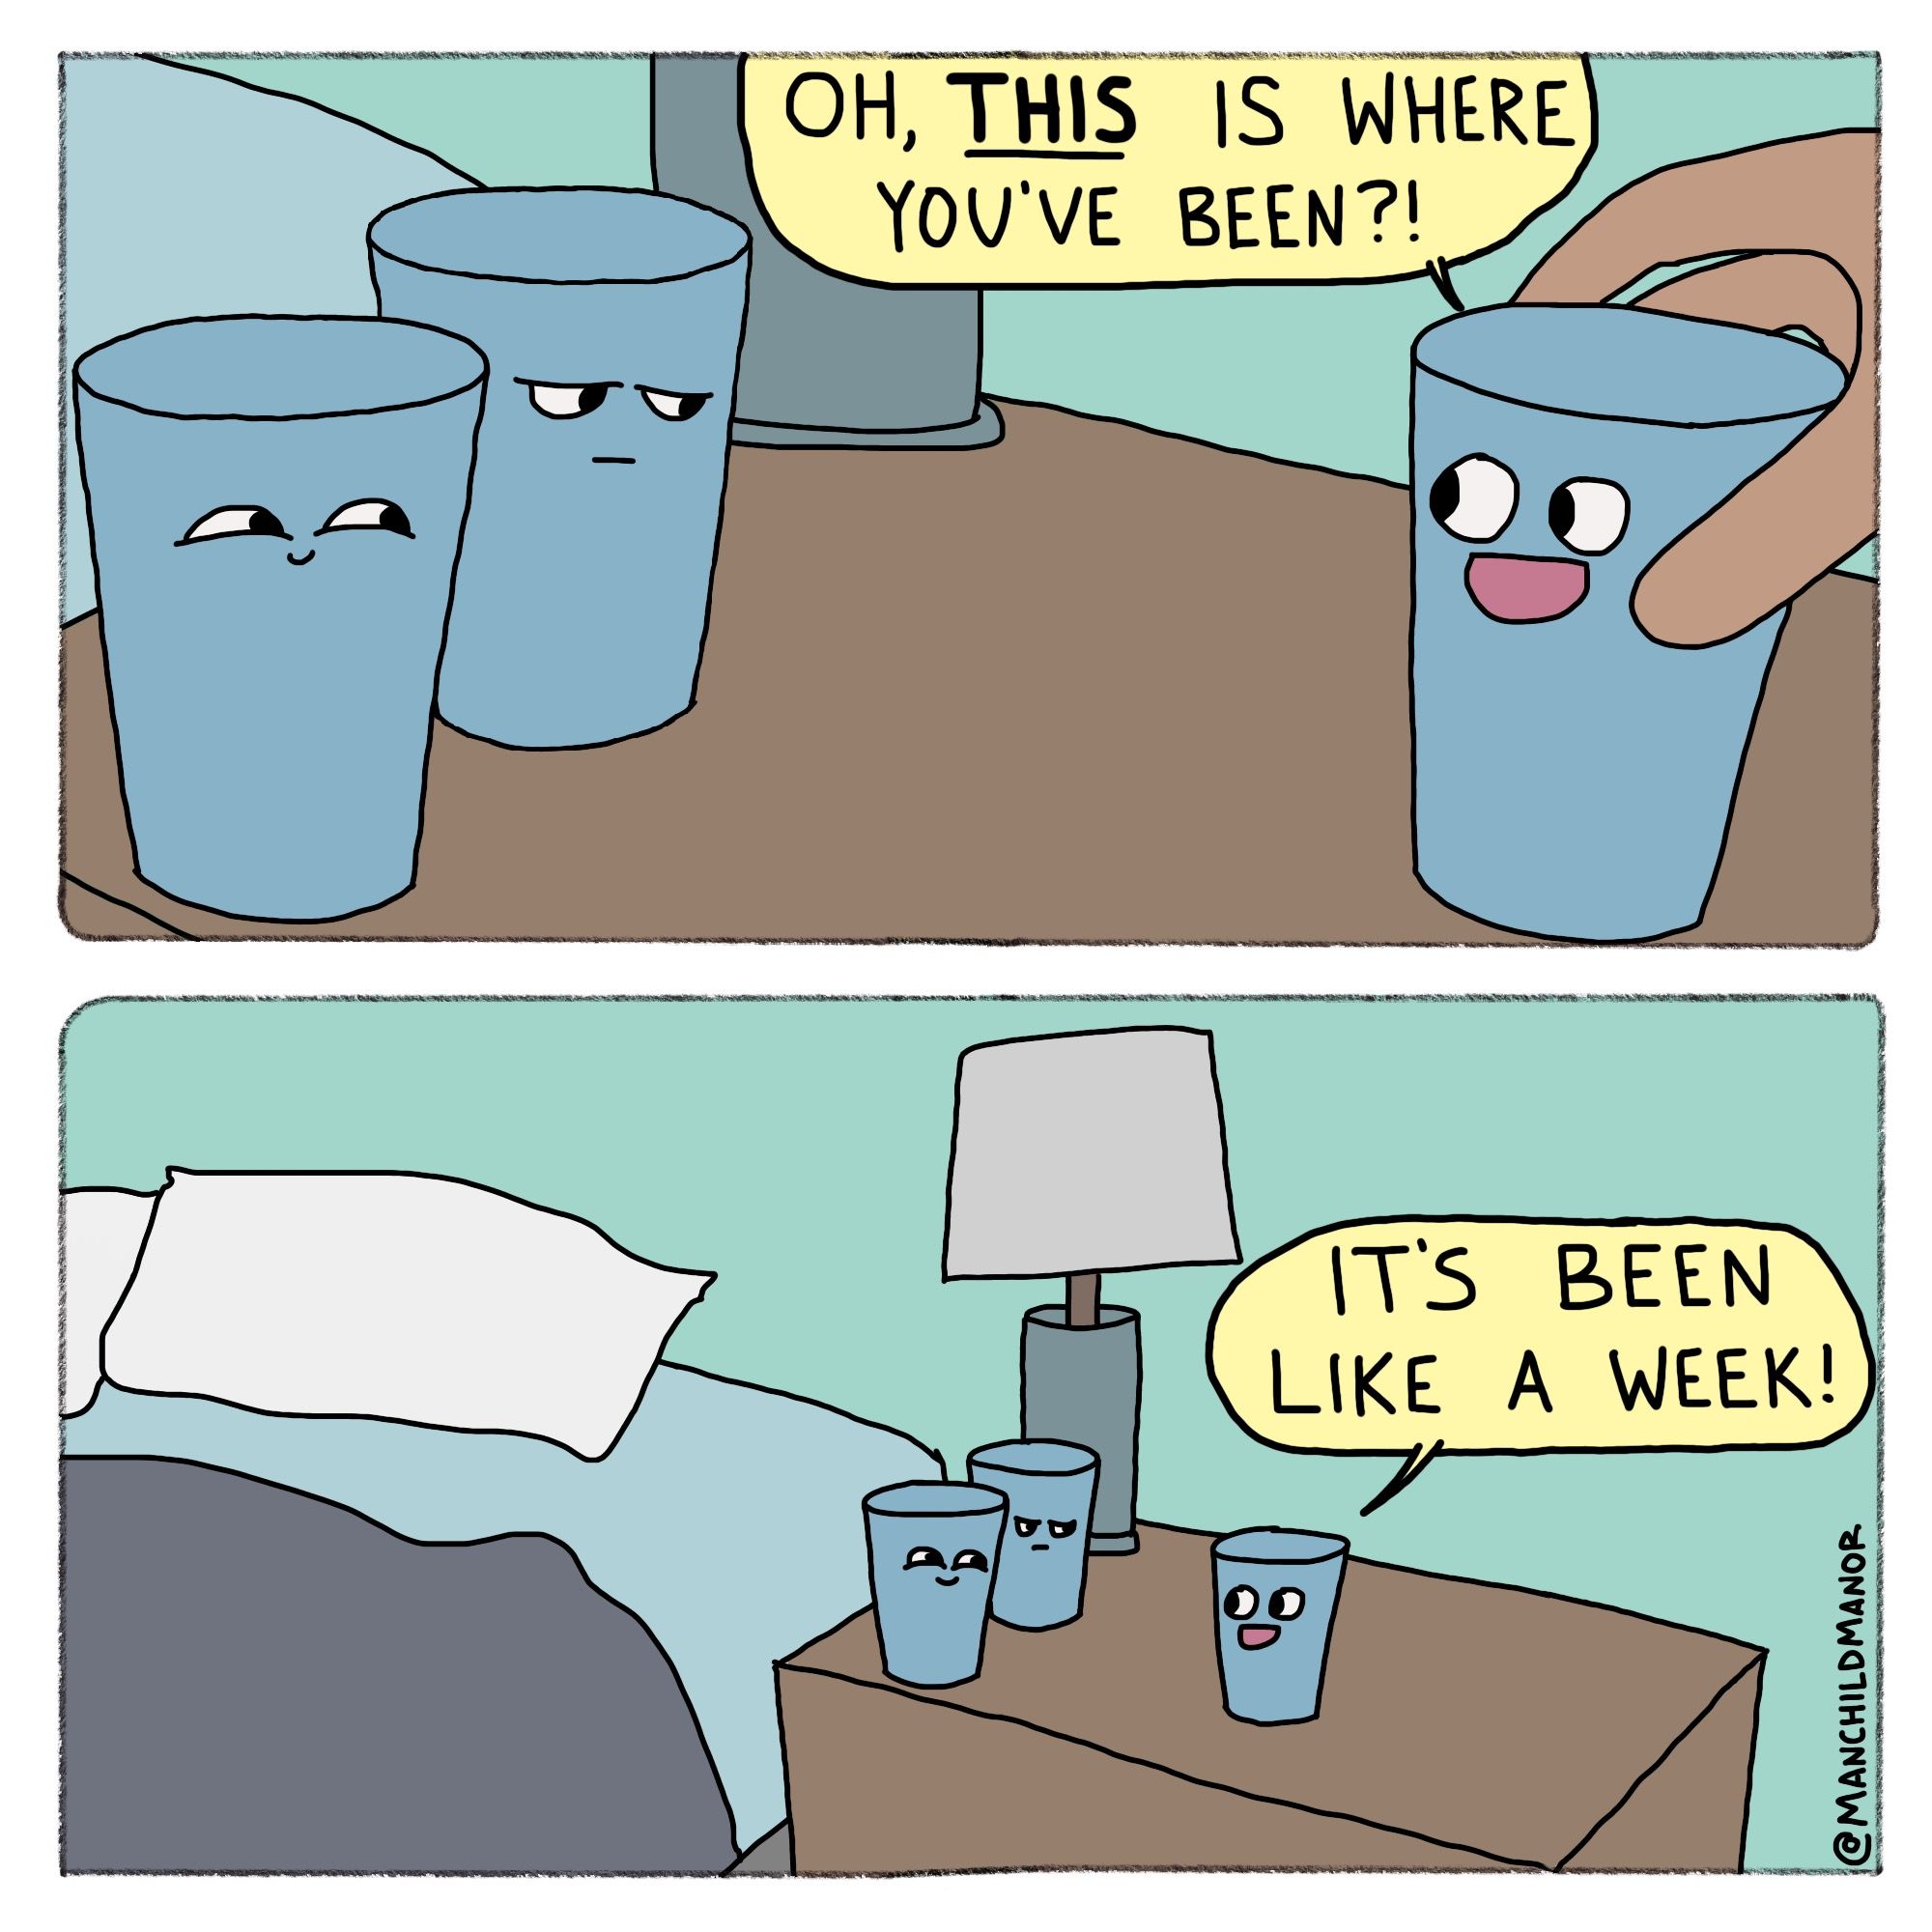 So many cups